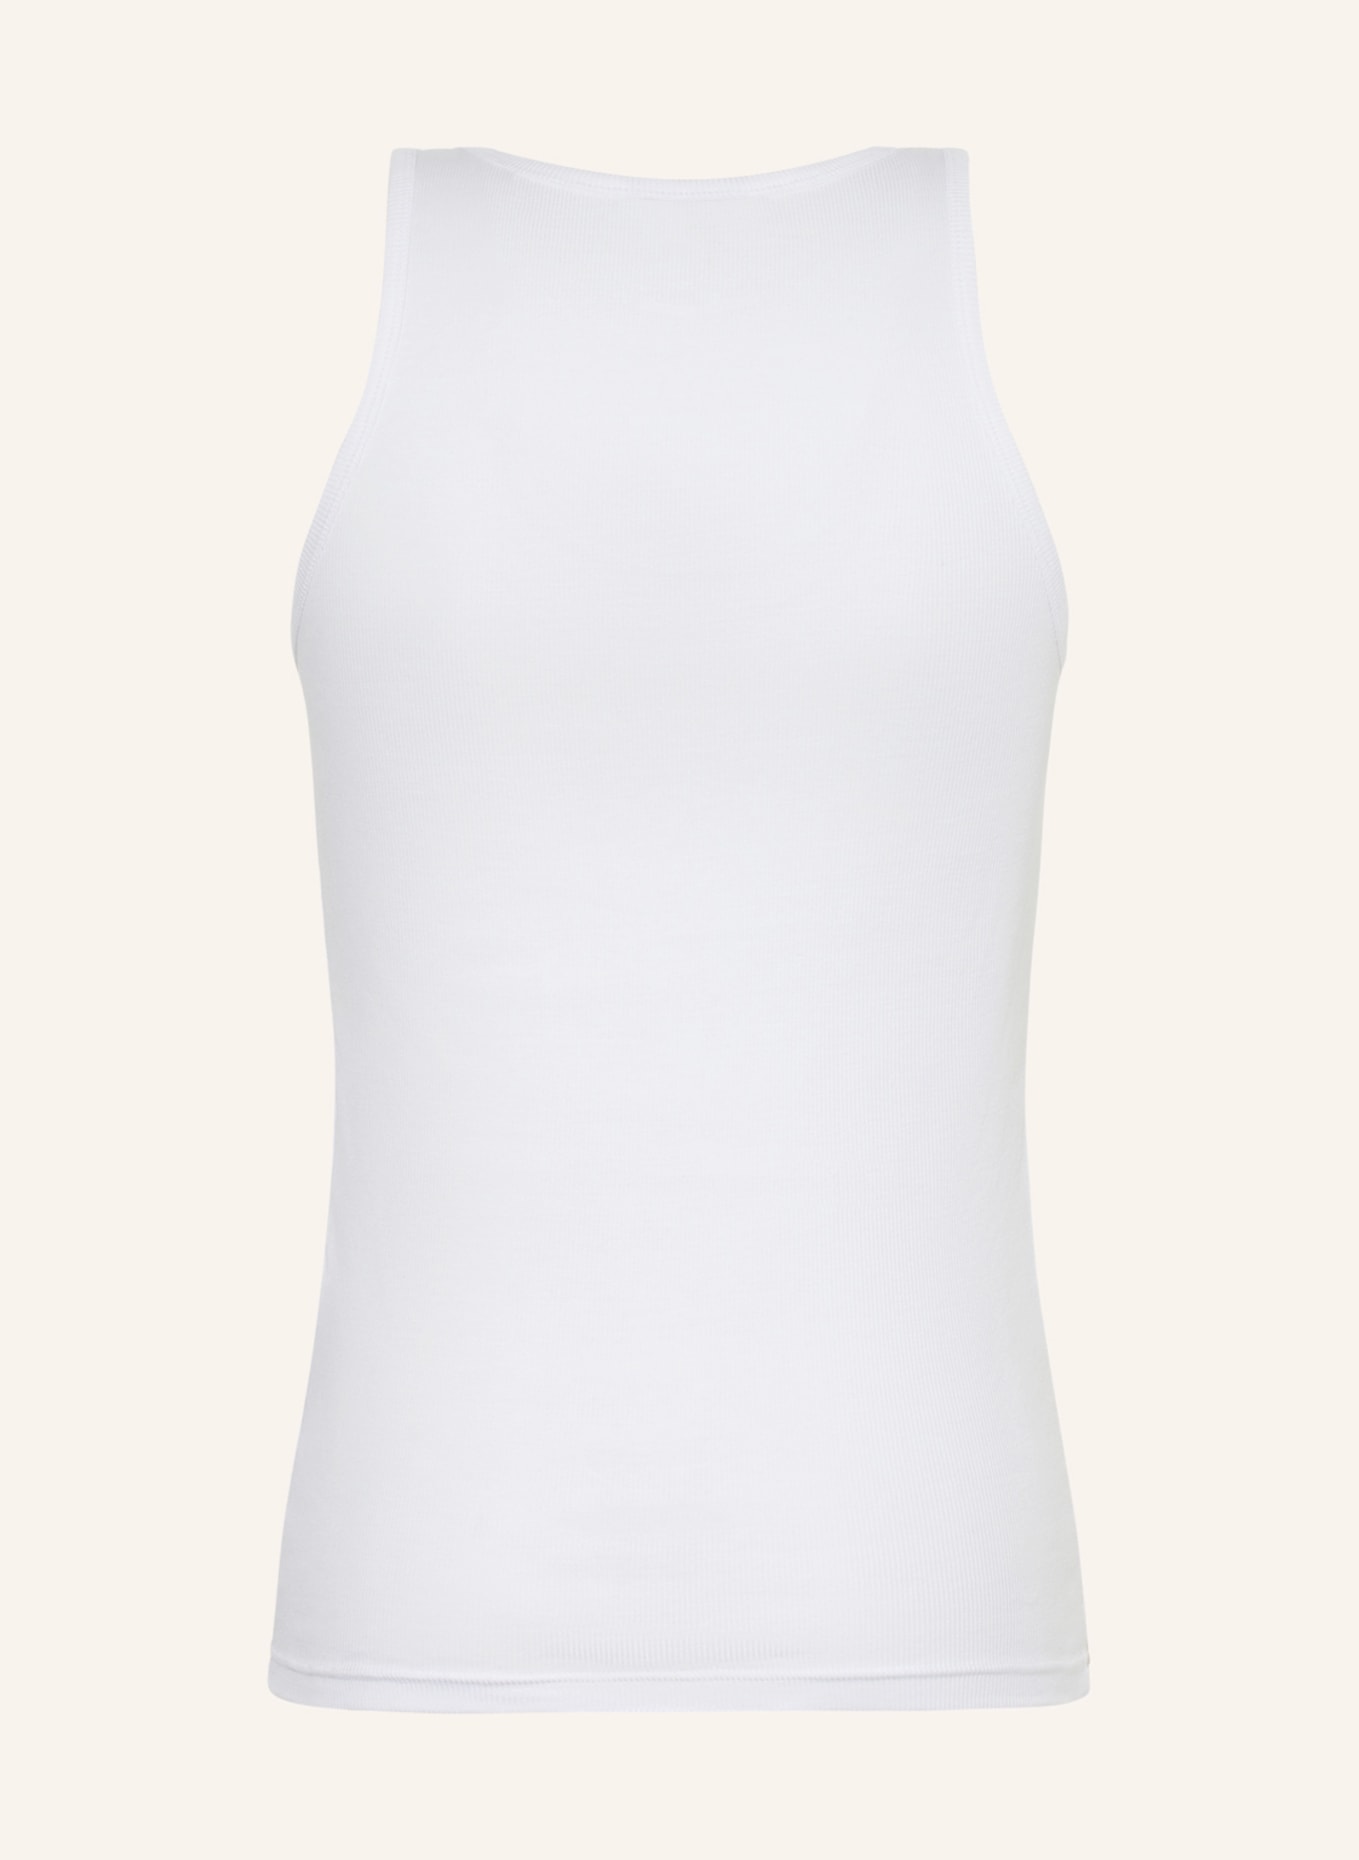 TOM FORD Undershirt, Color: WHITE (Image 2)